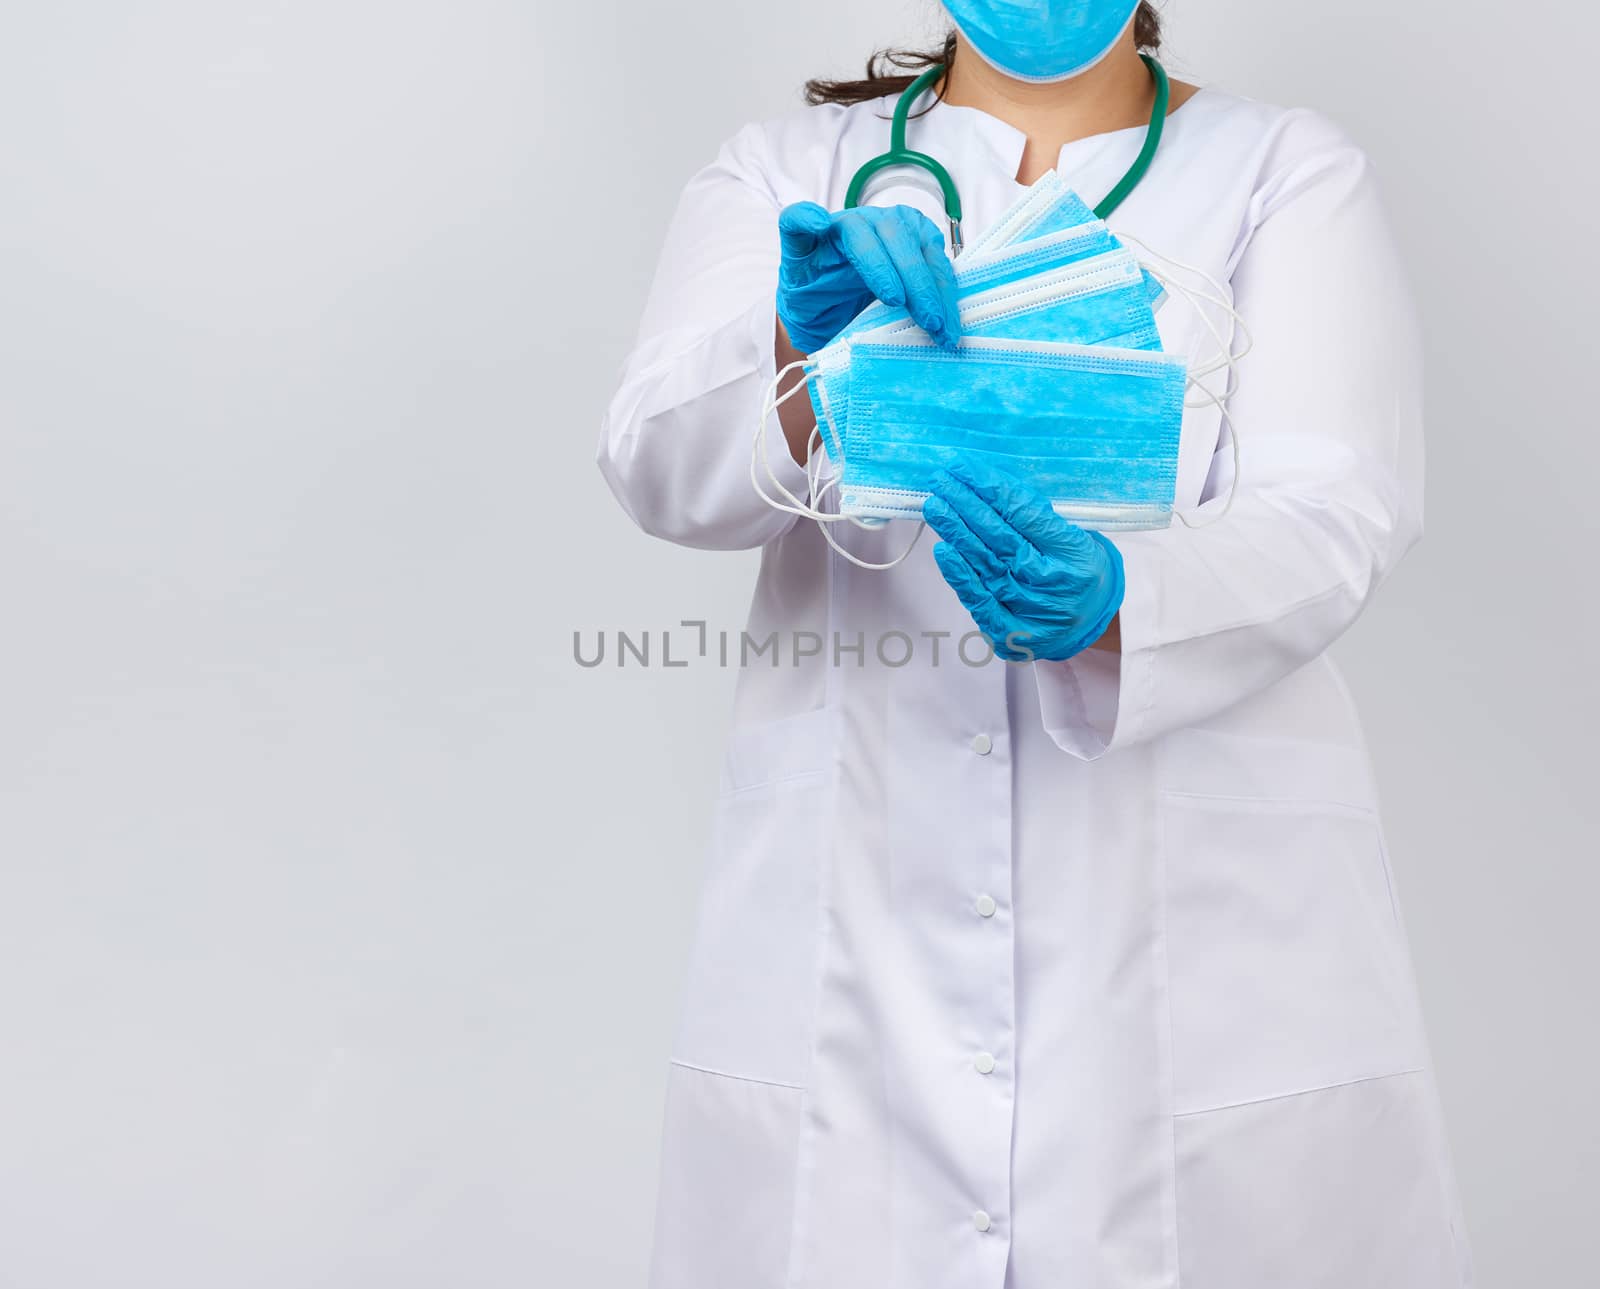 female doctor in a white coat and mask holds a stack of protecti by ndanko